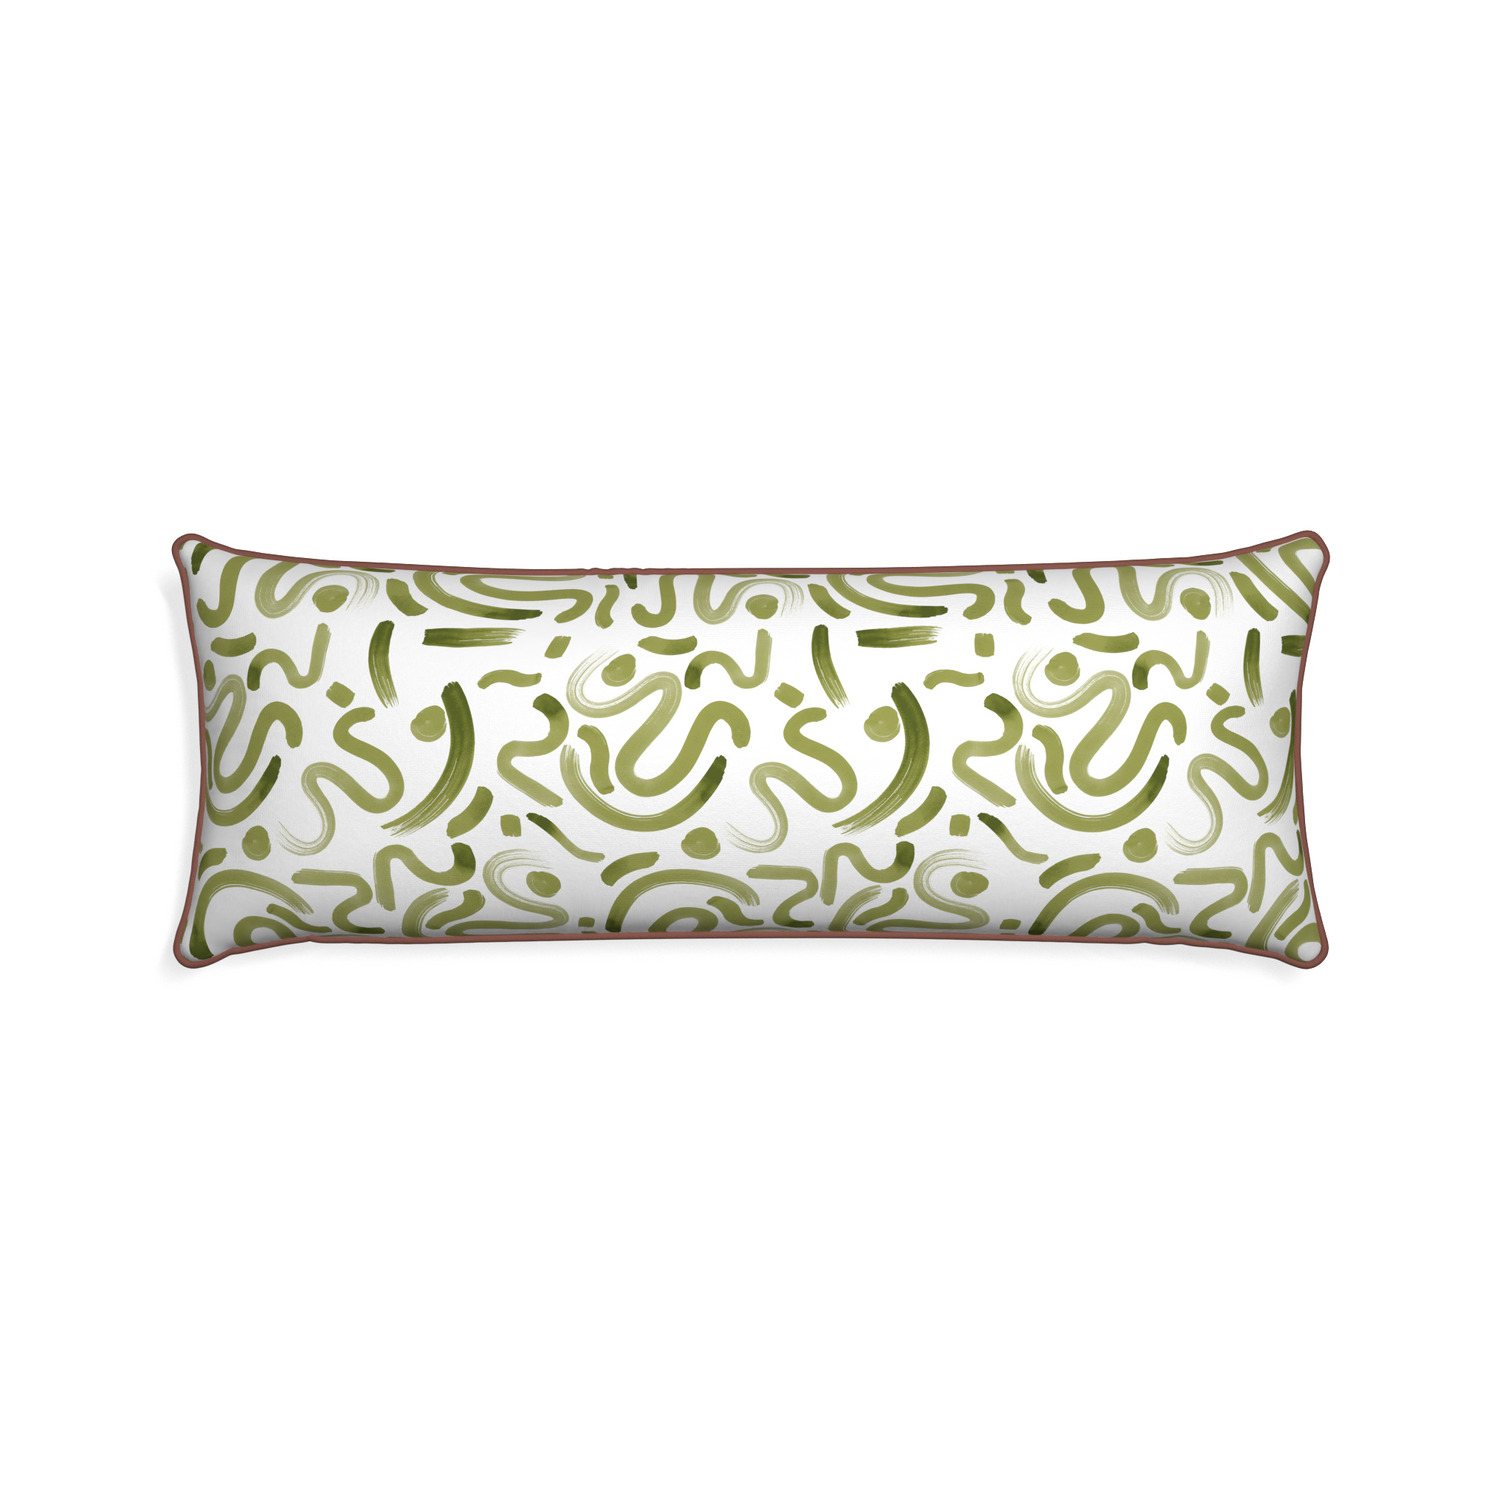 Xl-lumbar hockney moss custom pillow with w piping on white background